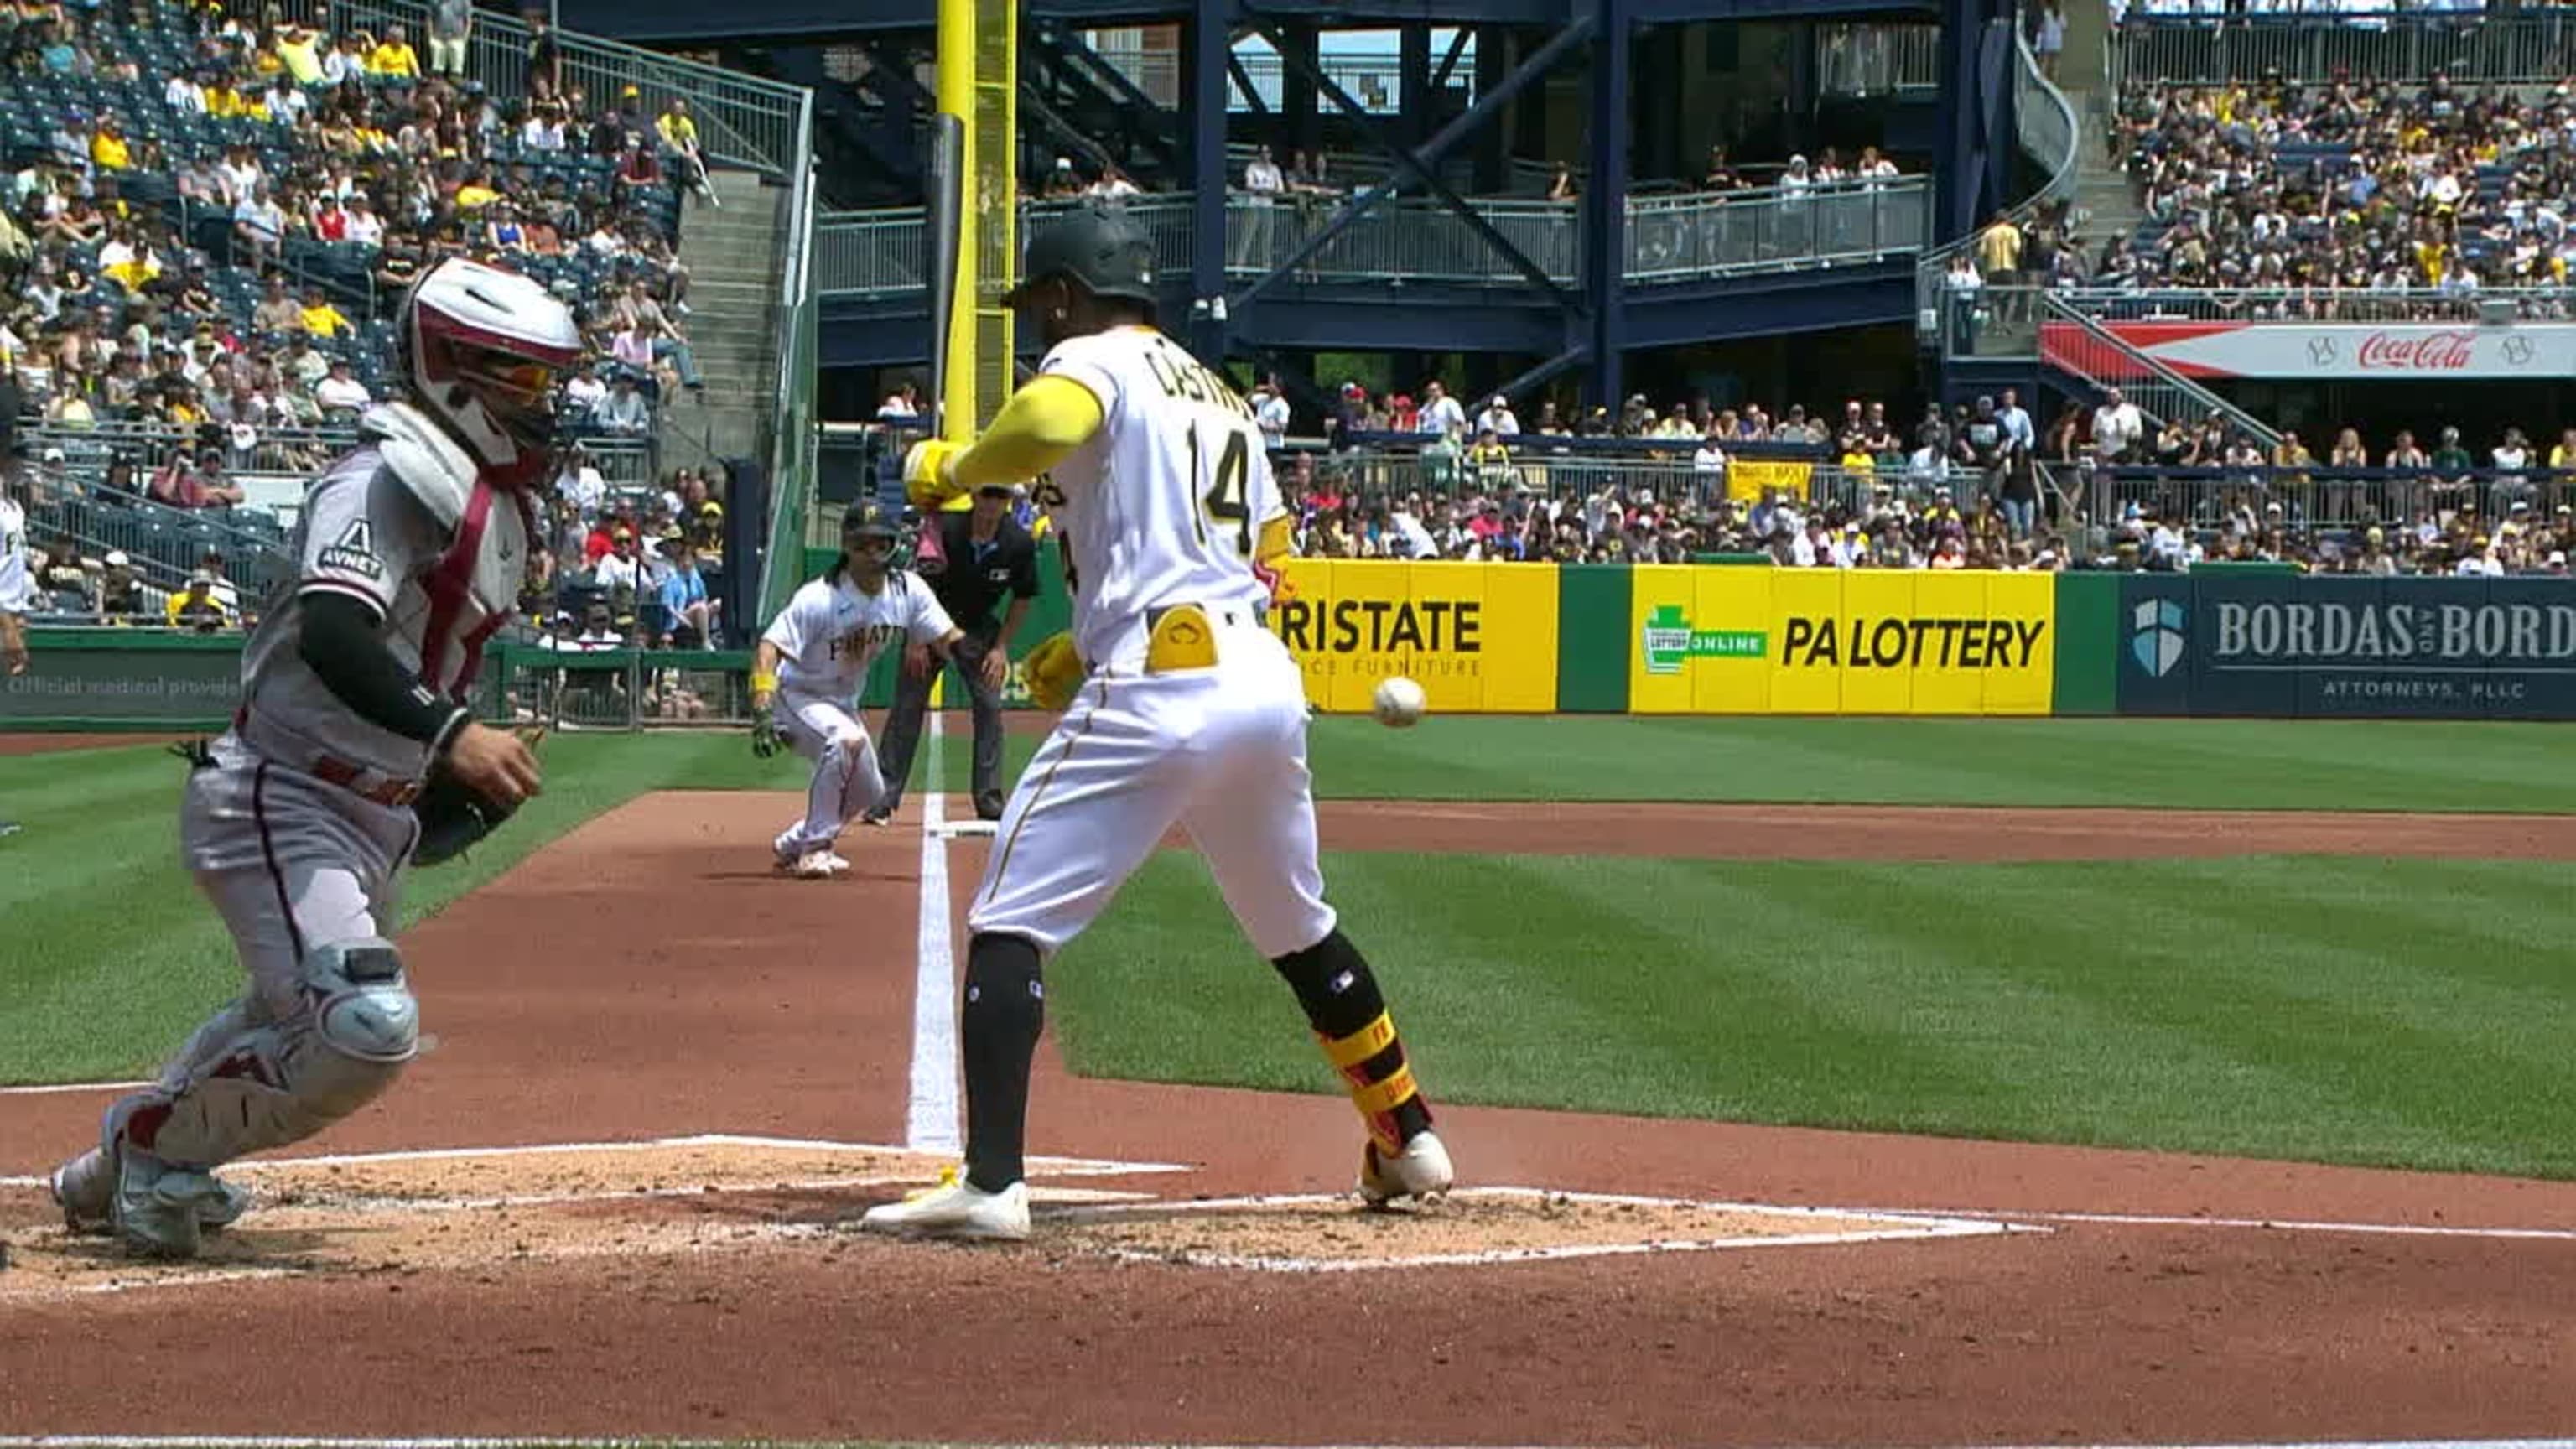 Pirates' Andrew McCutchen 'All Good' After Hand Injury Scare vs. Twins, News, Scores, Highlights, Stats, and Rumors